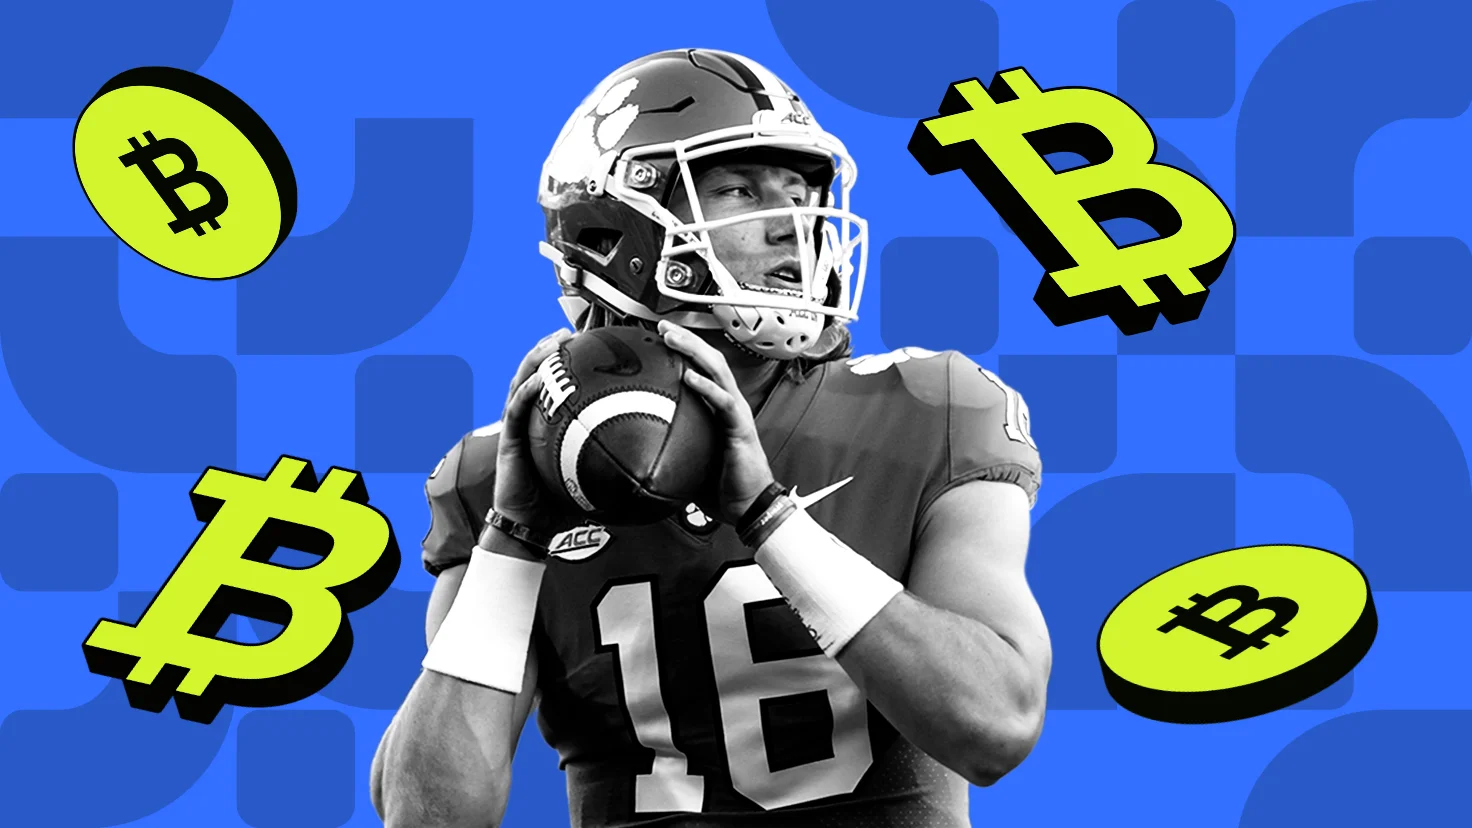 Who Are the Most Famous Sports Players Paid in Crypto?